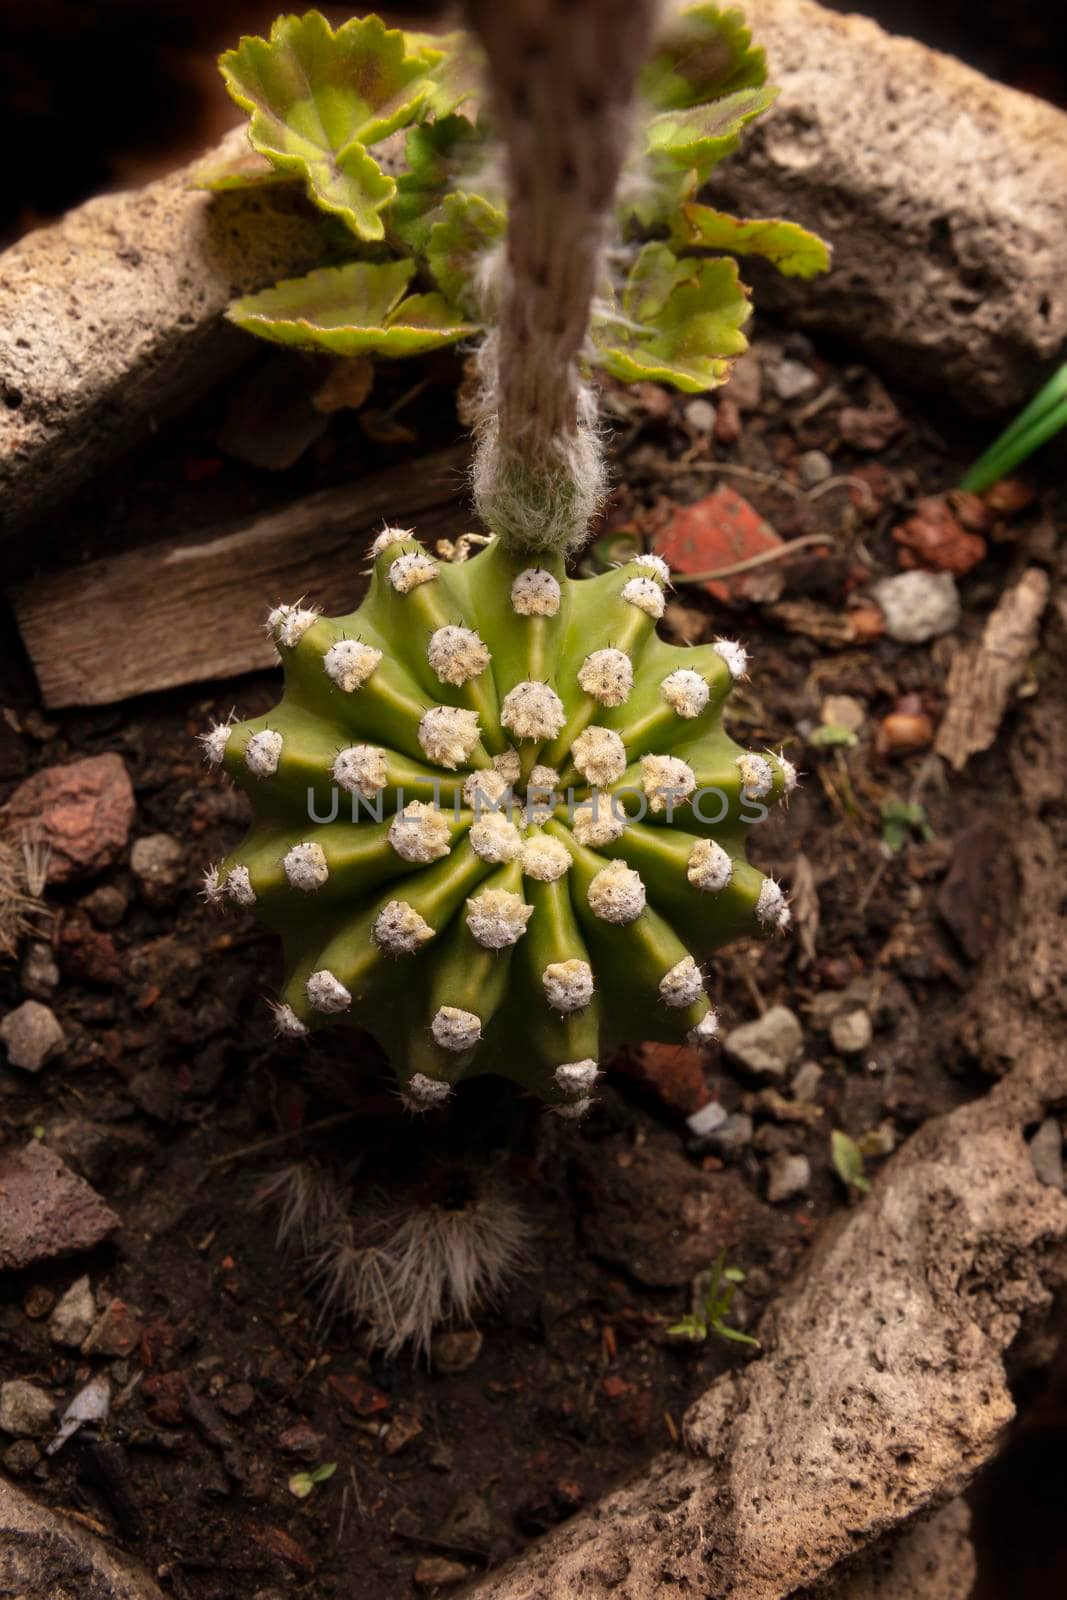 top view of Echinopsis subdenudata cactus in stone plantpot. Commonly called Domino Cactus or Easter Lily Cactus